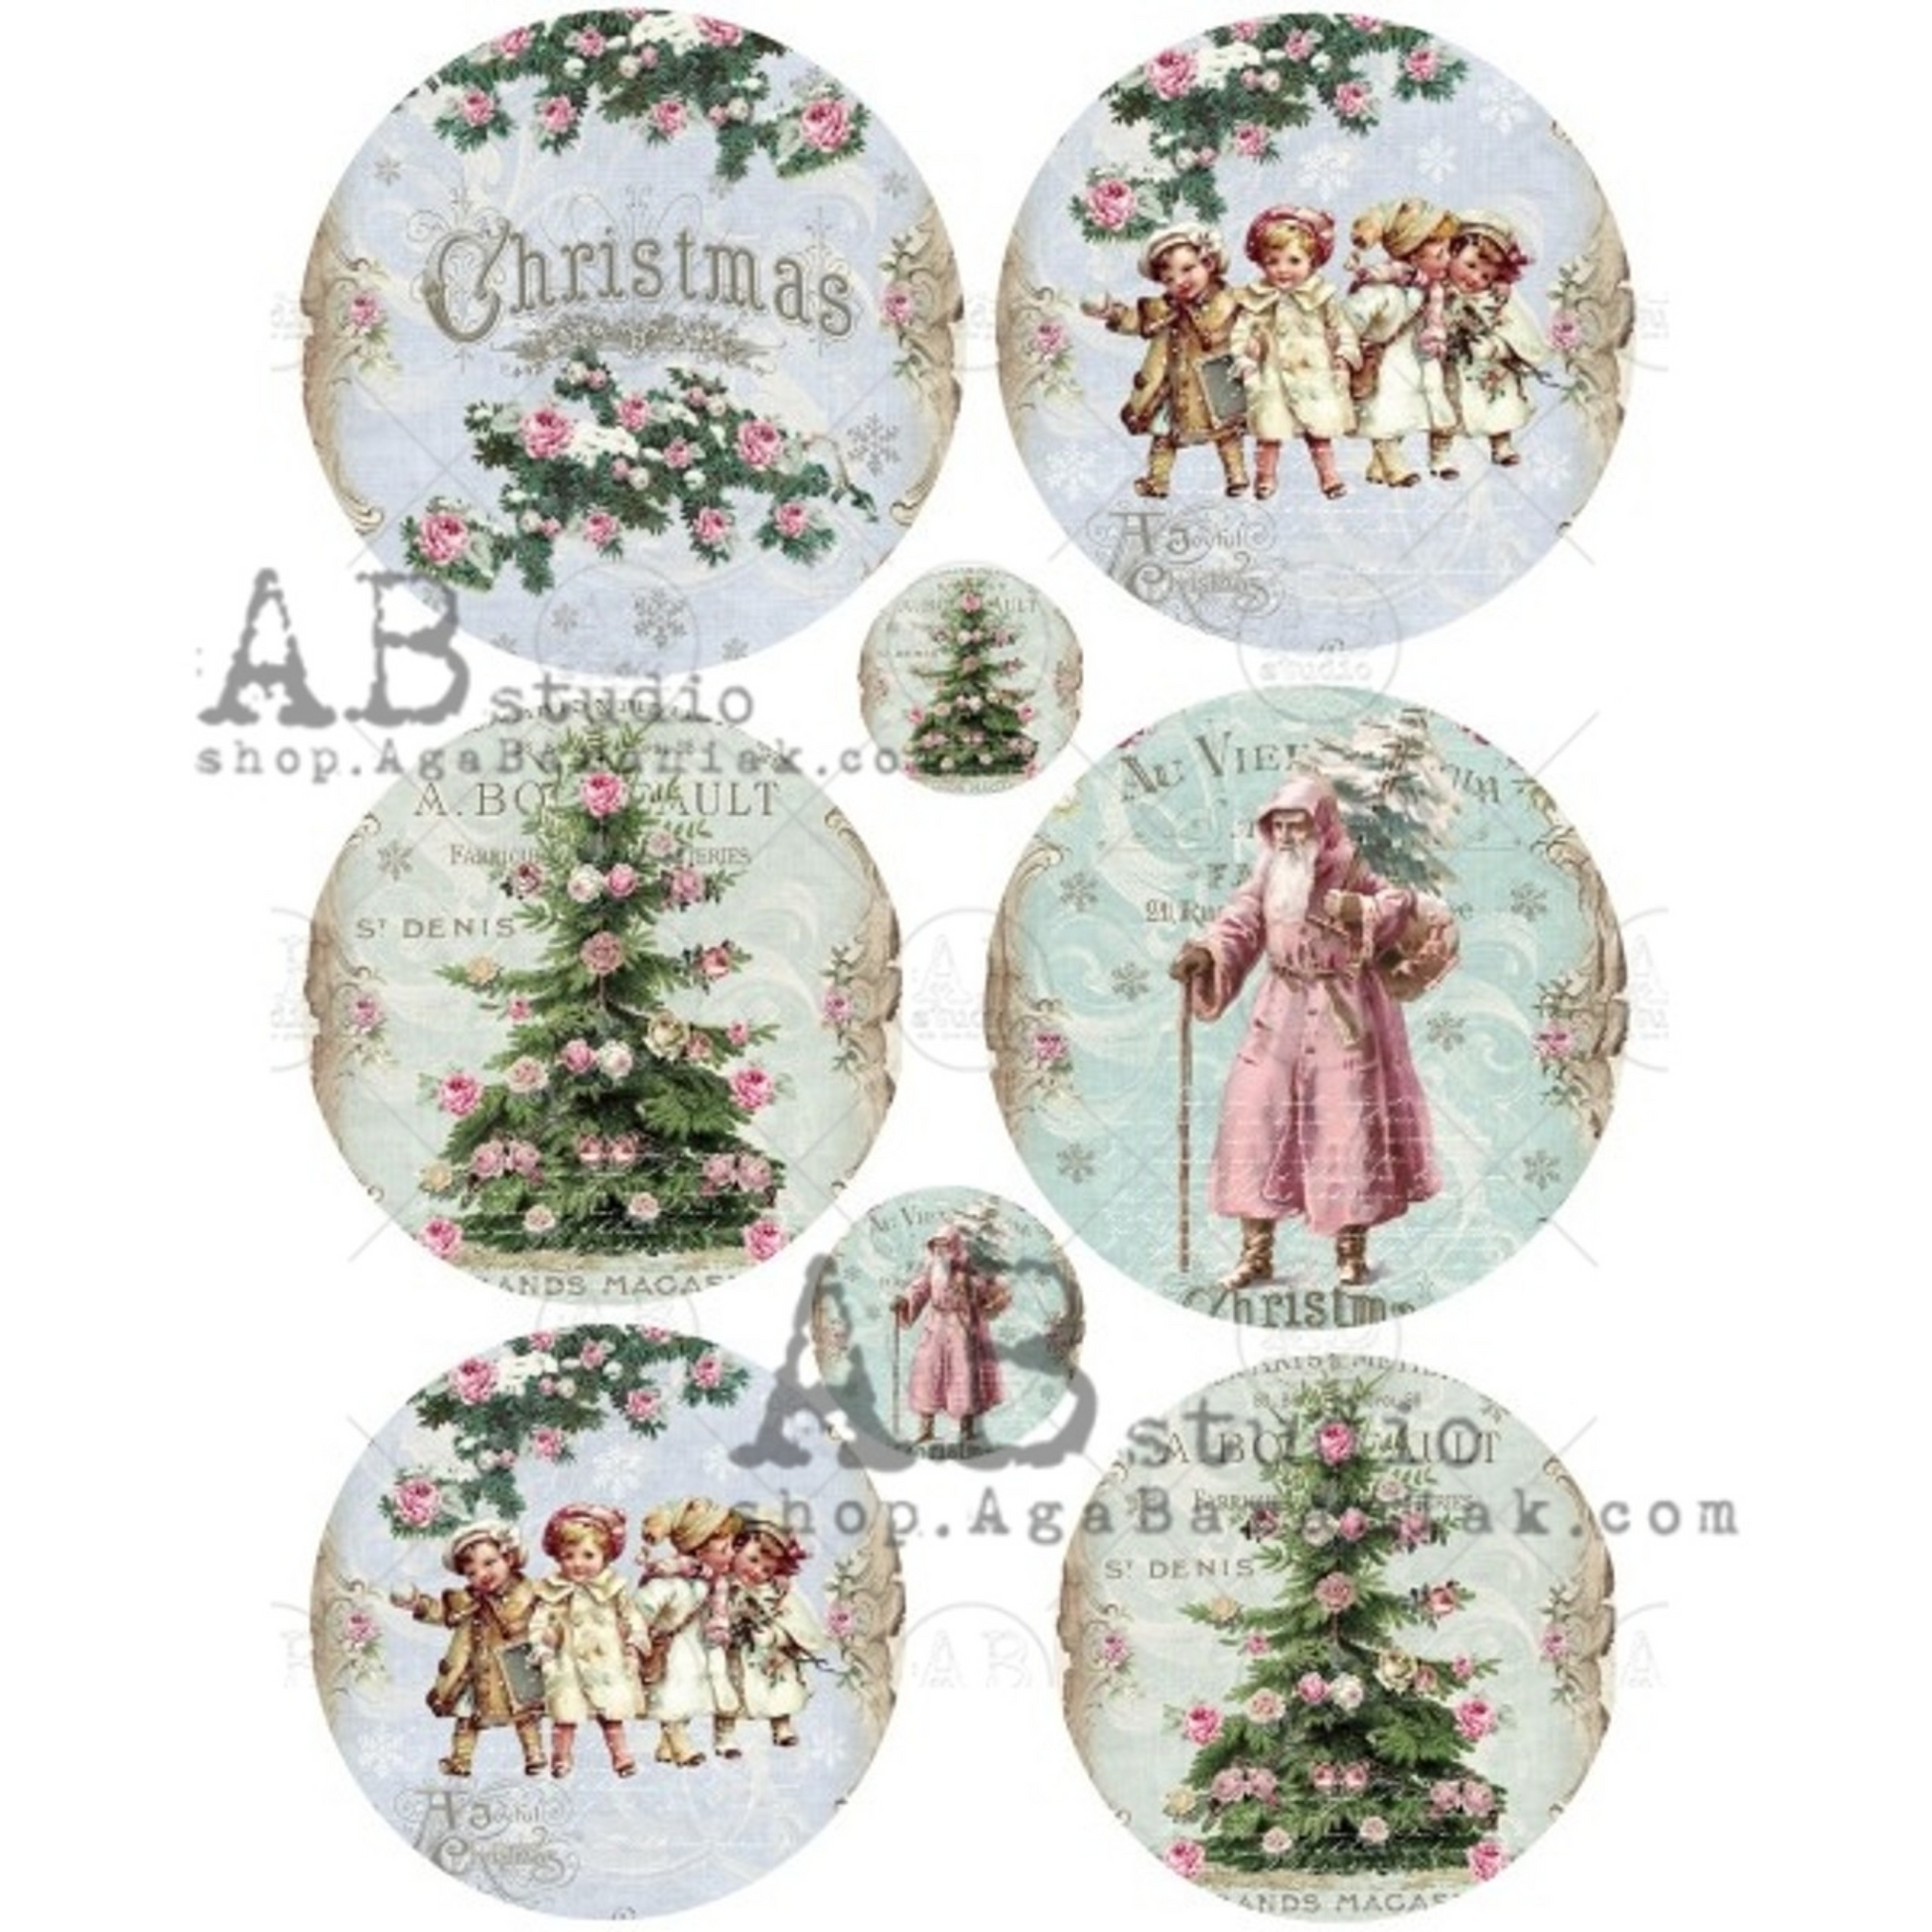 "Shabby Christmas Santa and Tree Rounds" decoupage rice paper by AB Studios available in size A4 at Milton's Daughter.